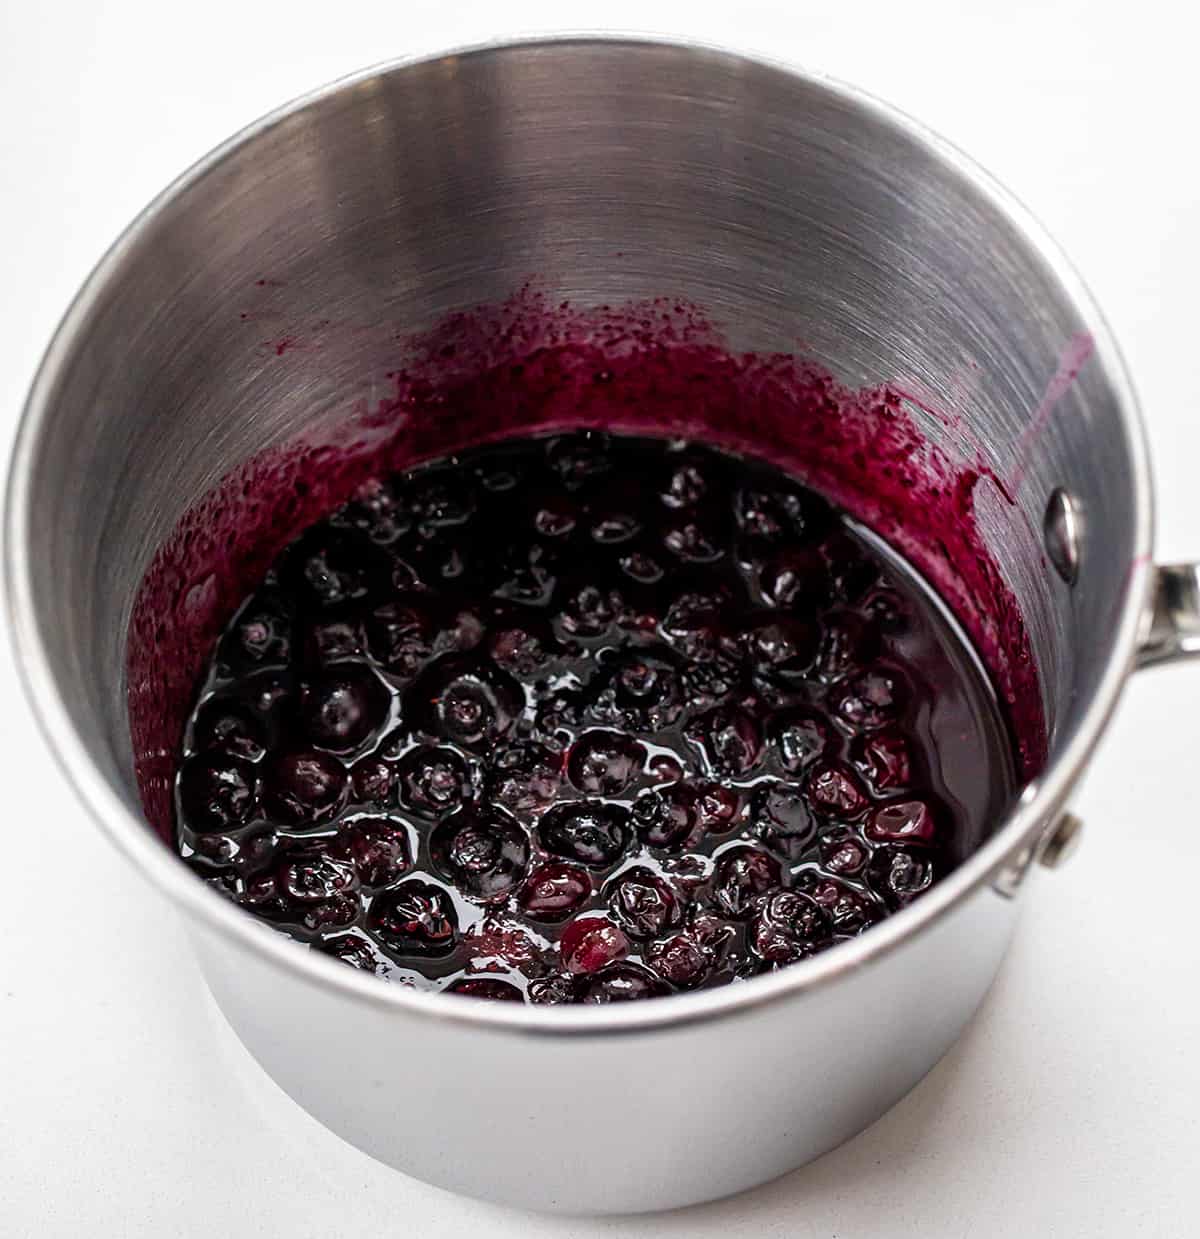 Pan of Blueberry Puree.